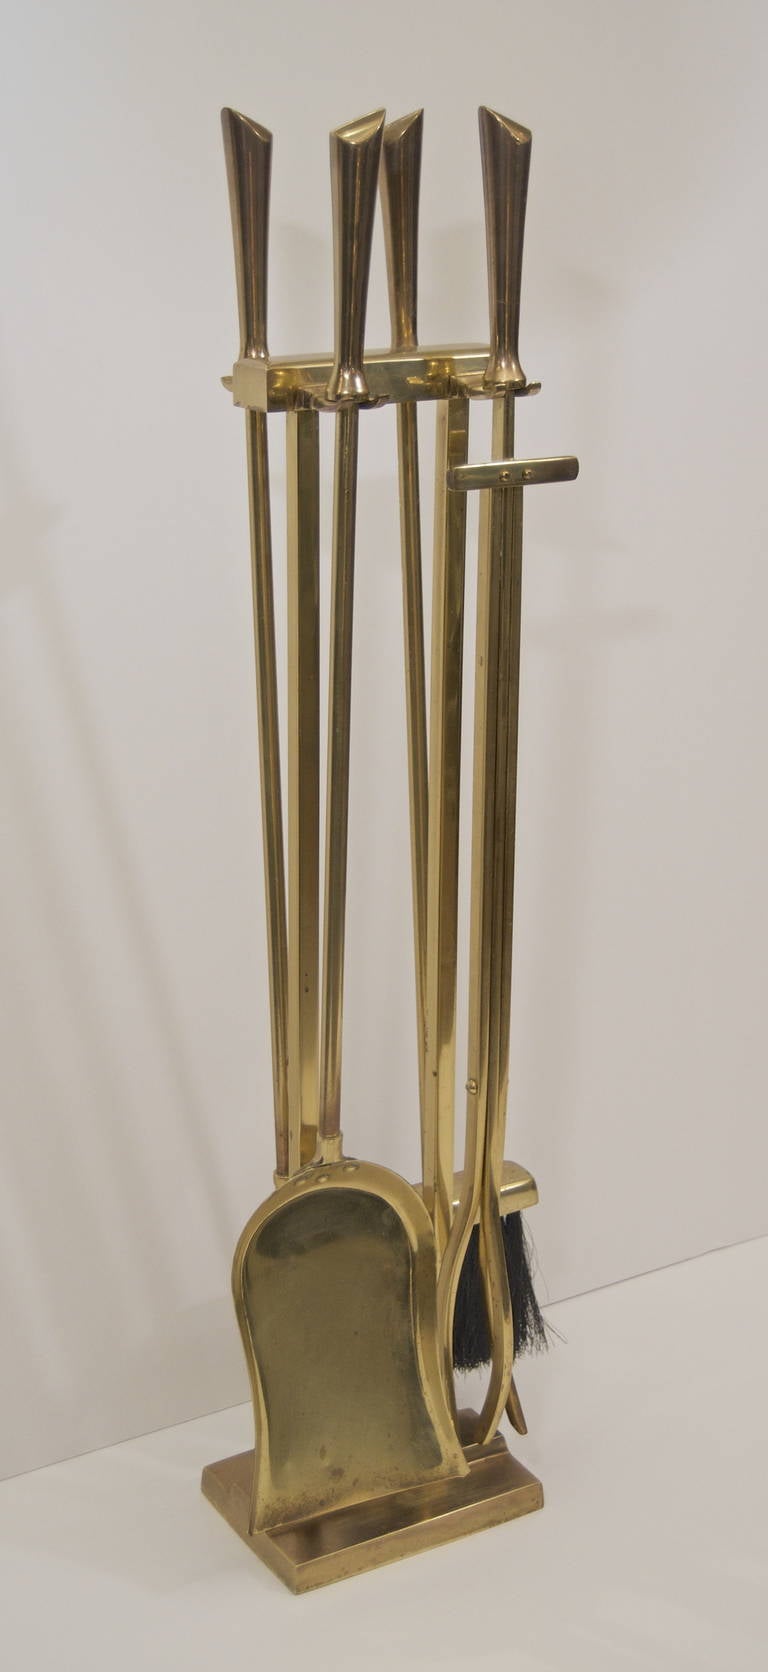 A streamlined fireplace tool set in brass reminiscent of Deskey designs.